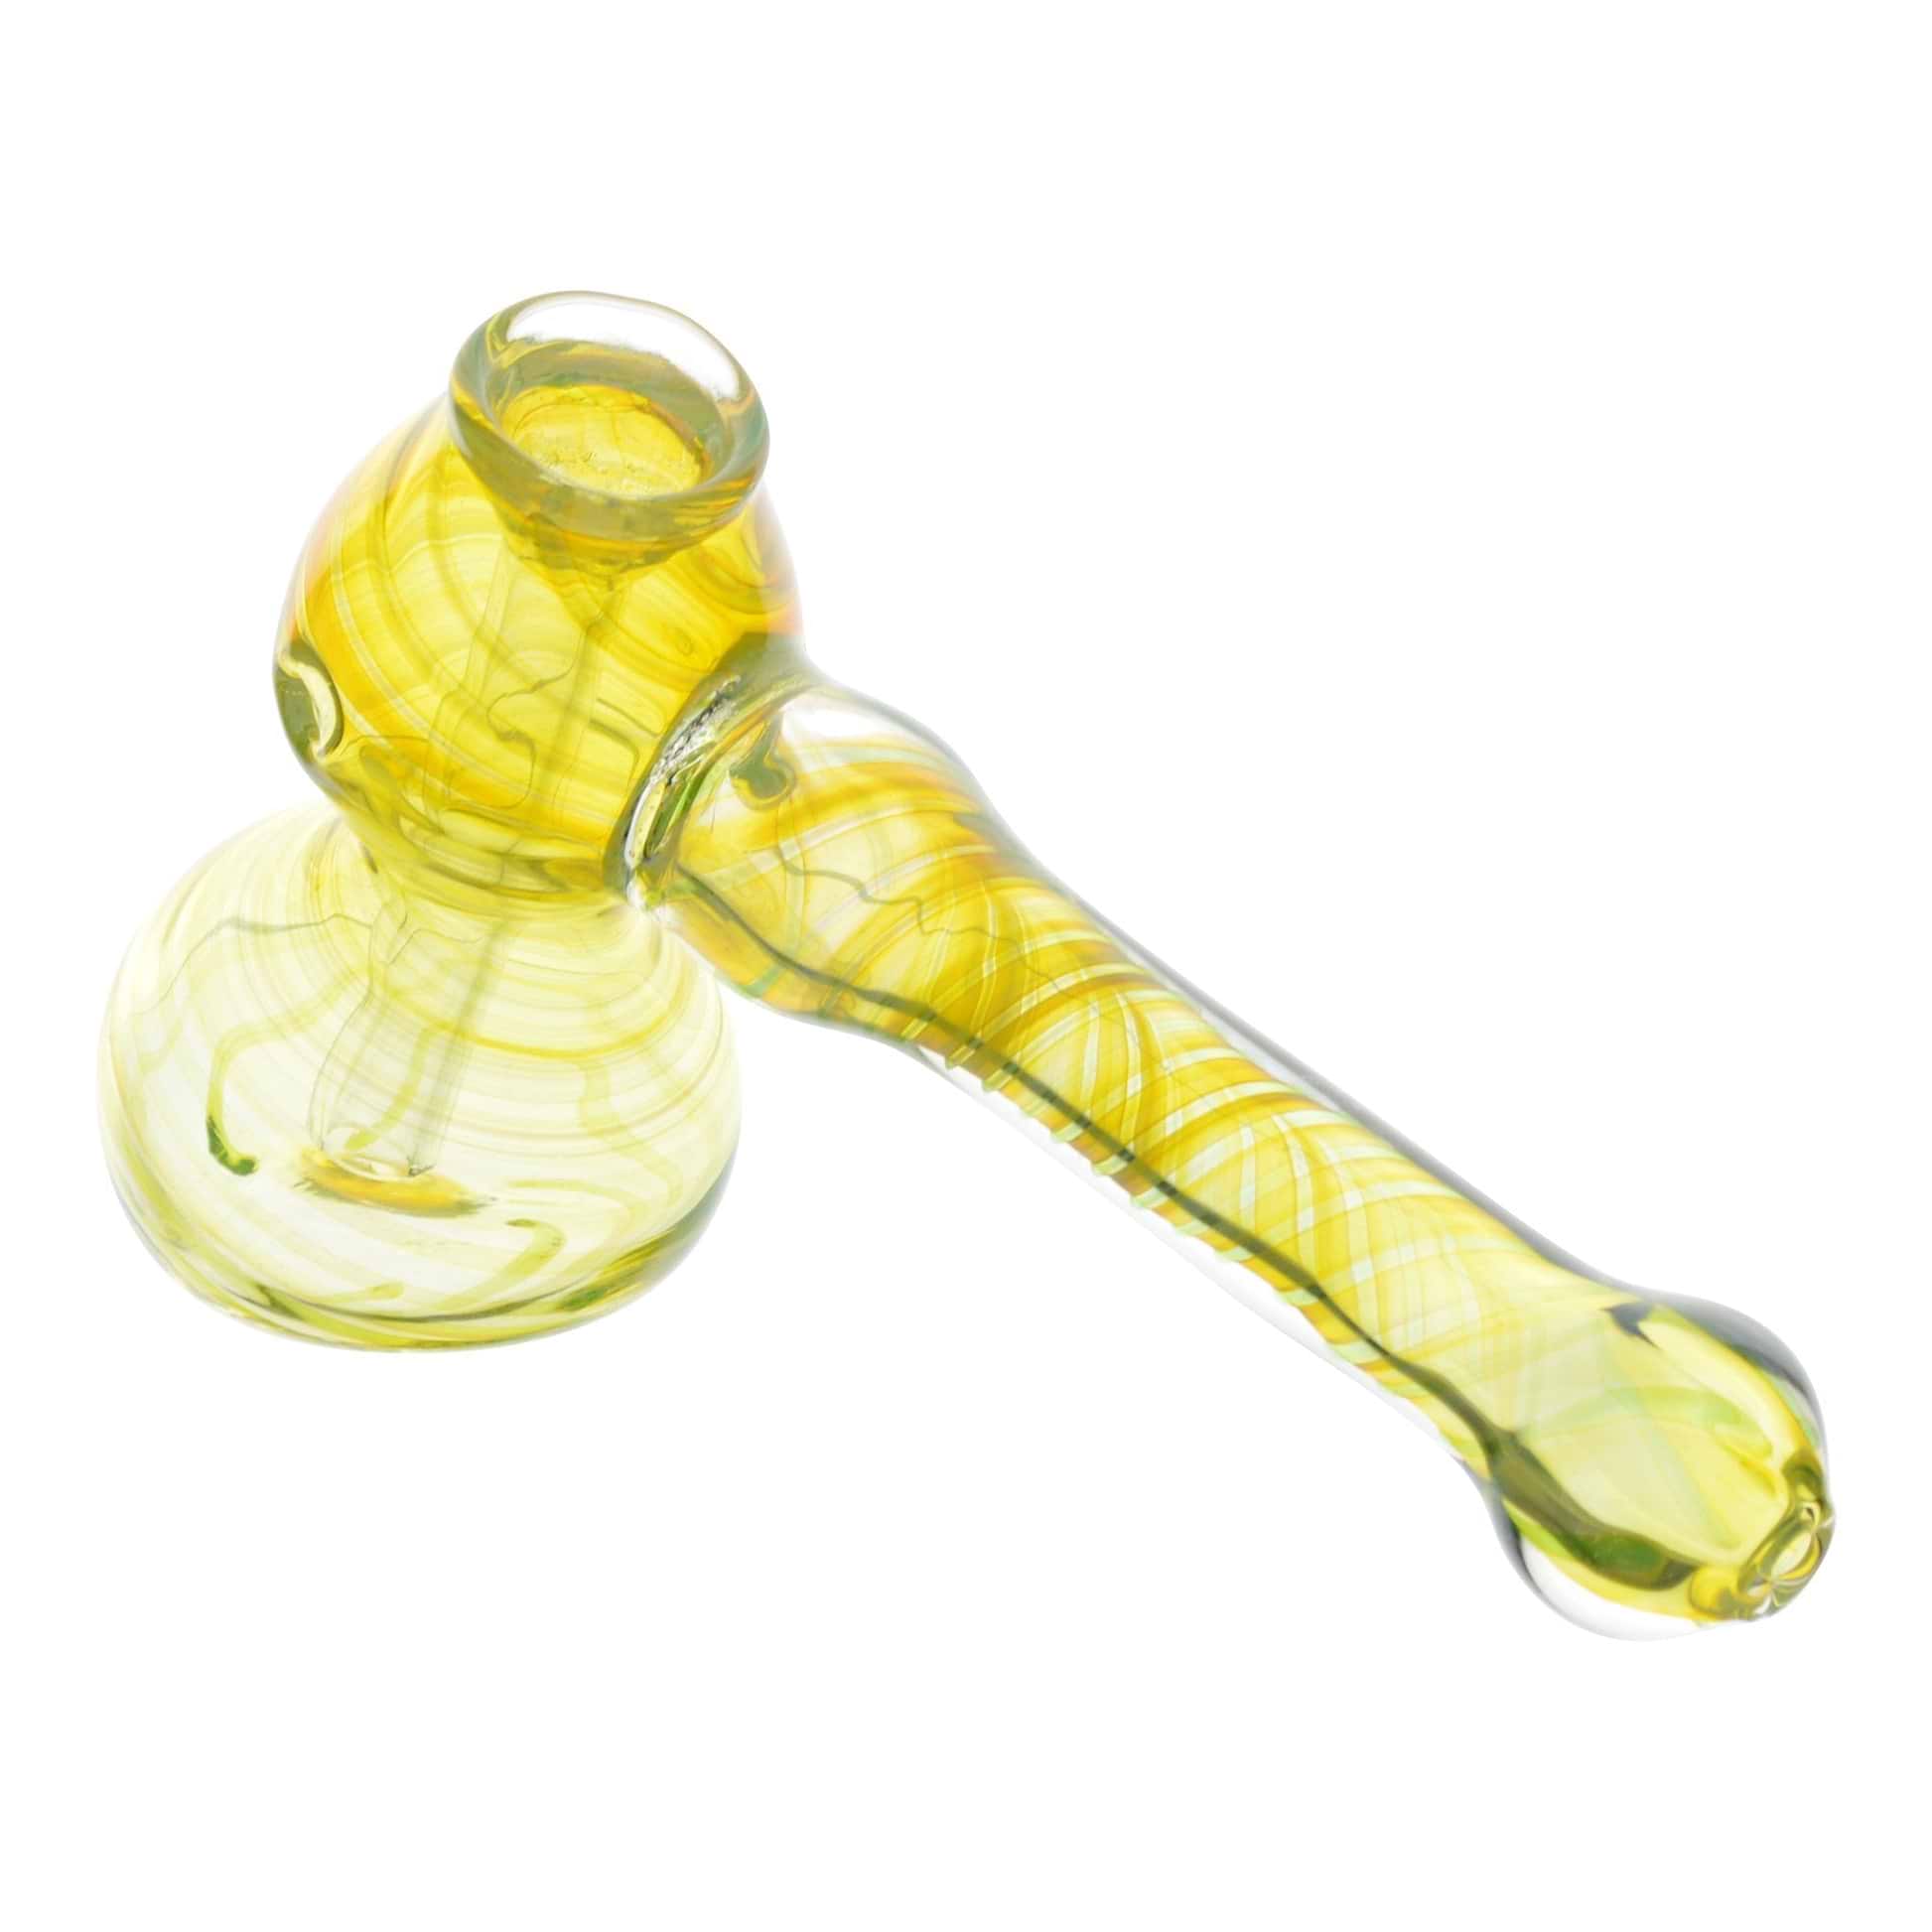 4.5-inch bubbler smoking device made of glass that changes color thin swirling colors hammer shape design